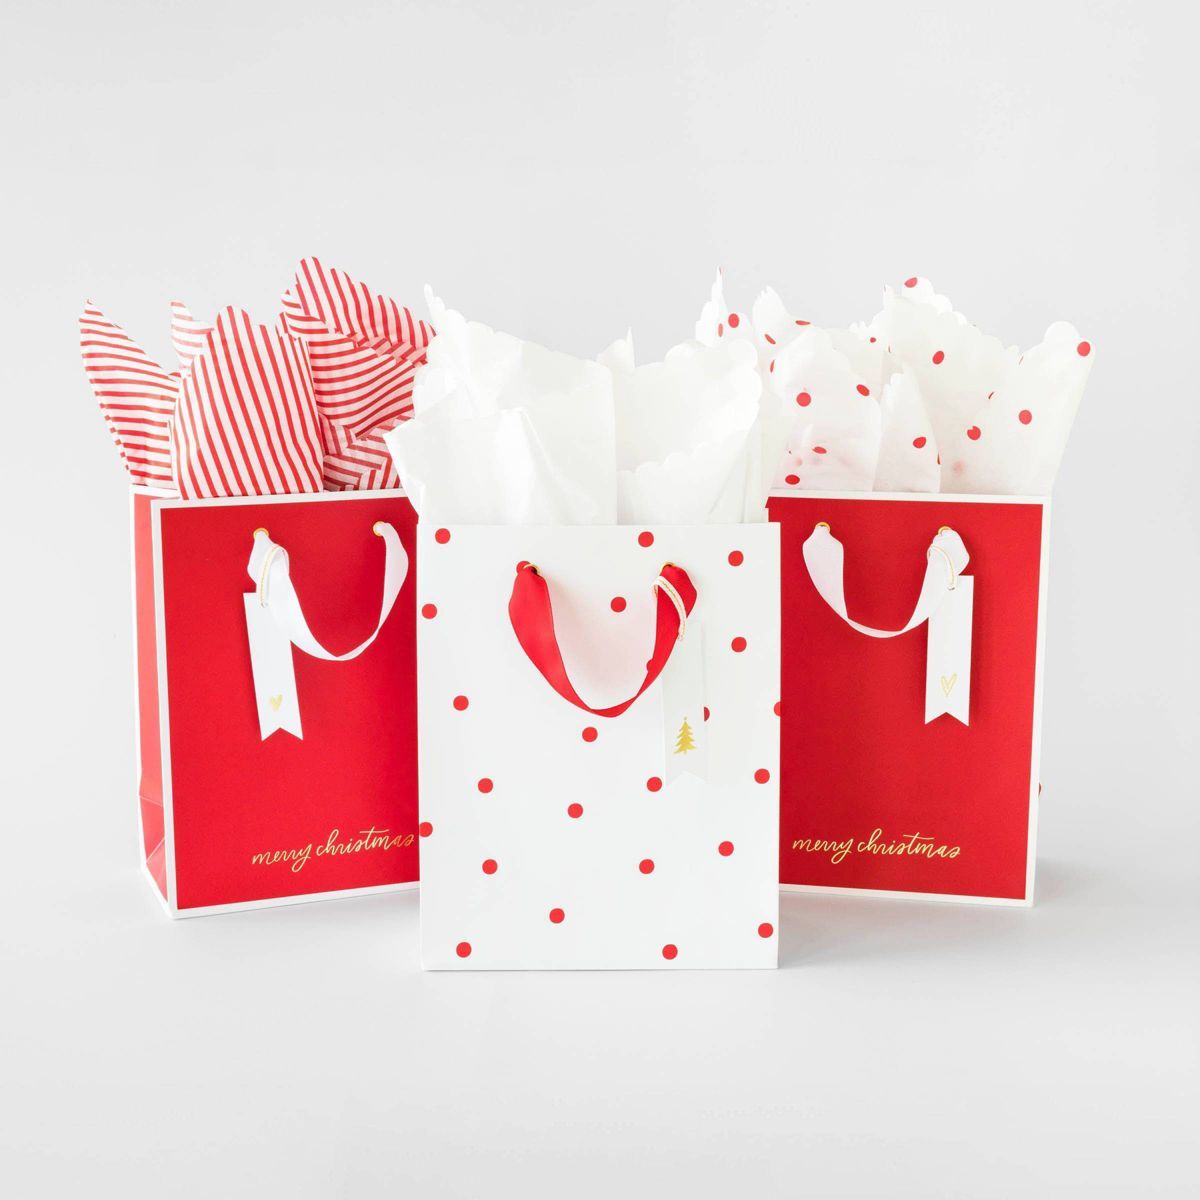 25ct Scalloped Gift Tissue Paper White/Red - Sugar Paper™ + Target | Target